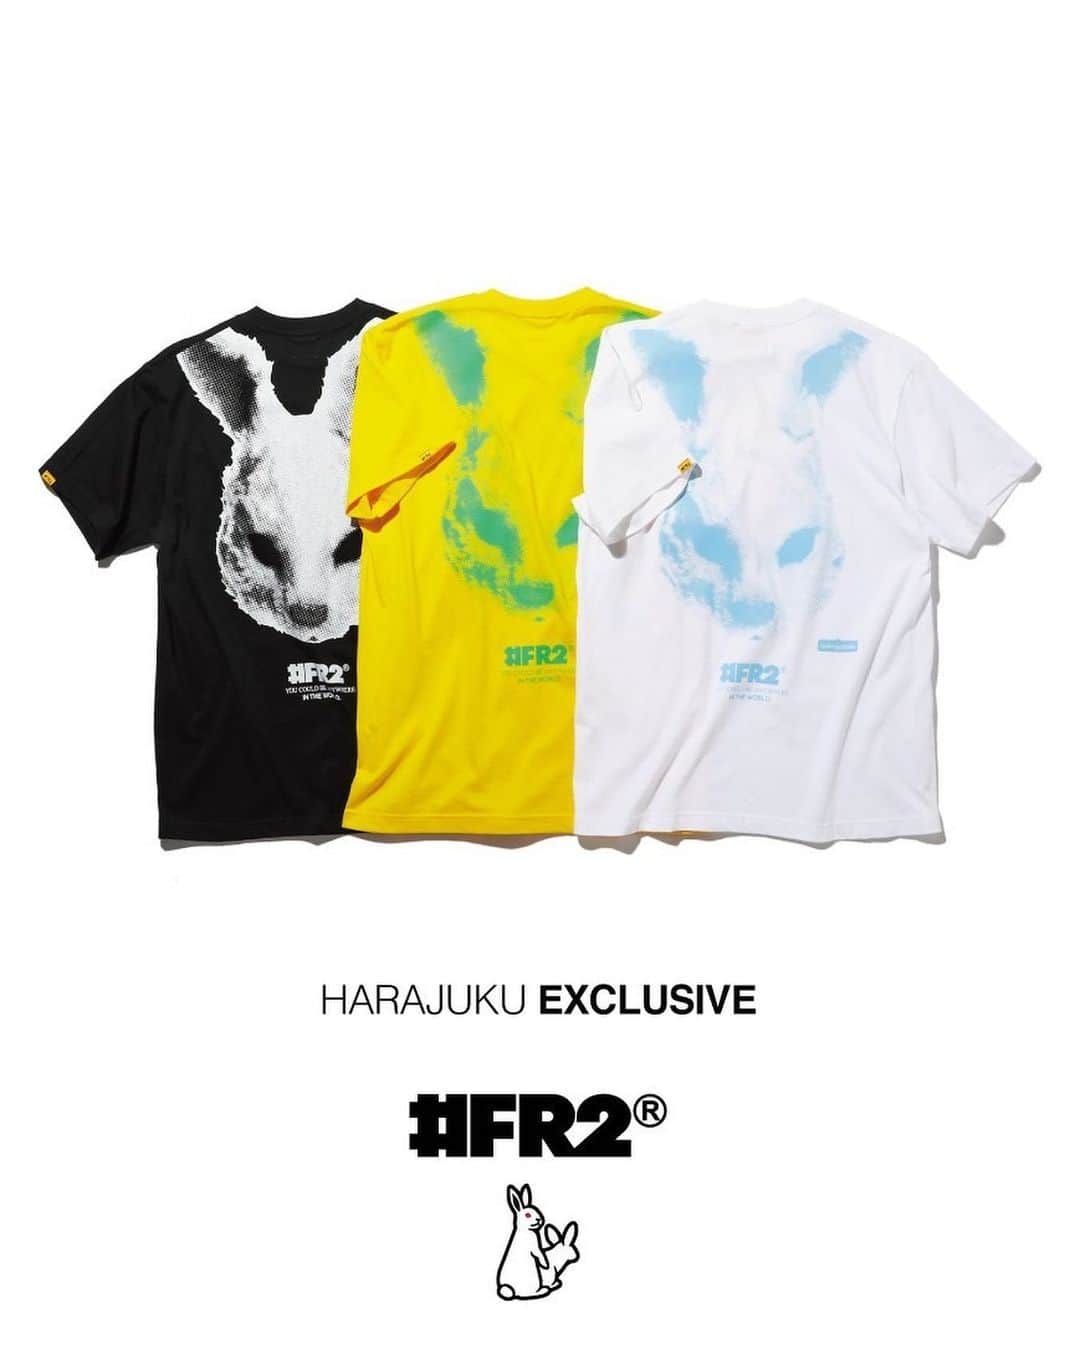 #FR2さんのインスタグラム写真 - (#FR2Instagram)「6th Anniversary🐇🐇  On Thursday, April 27, 2023, #FR2 HARAJUKU will celebrate its 6th anniversary with a renovated reopening.  In conjunction with this event, the following two limited edition items will be released:  Rabbit Mask T-shirt: ¥8,800 (In Tax)  Limited Photo T-shirt: ¥7,700 (In Tax)  Release details: #FR2 HARAJUKU Opening Thursday, April 27, 2023 *Please note that there may be restrictions on purchases. These items will only be available for purchase at #FR2 HARAJUKU.  6th Anniversary🐇🐇  2023 / 4/ 27（Thu）に6周年を向かえる#FR2 HARAJUKUがリニューアルオープン致します。  それに伴い下記の2型のリミテッドアイテムを発売します。  Rabbit Mask T-shirt  8,800（In Tax）  Limited Photo T-shirt 7,700（In Tax）  ■発売詳細 #FR2 HARAJUKU 2023/4/27（Thu） OPEN ※販売は購入制限を設ける場合があります。 #FR2 HARAJUKU以外での発売はございません。  #FR2#fxxkingrabbits#頭狂色情兎#FR2HARAJUKU」4月24日 19時25分 - fxxkingrabbits